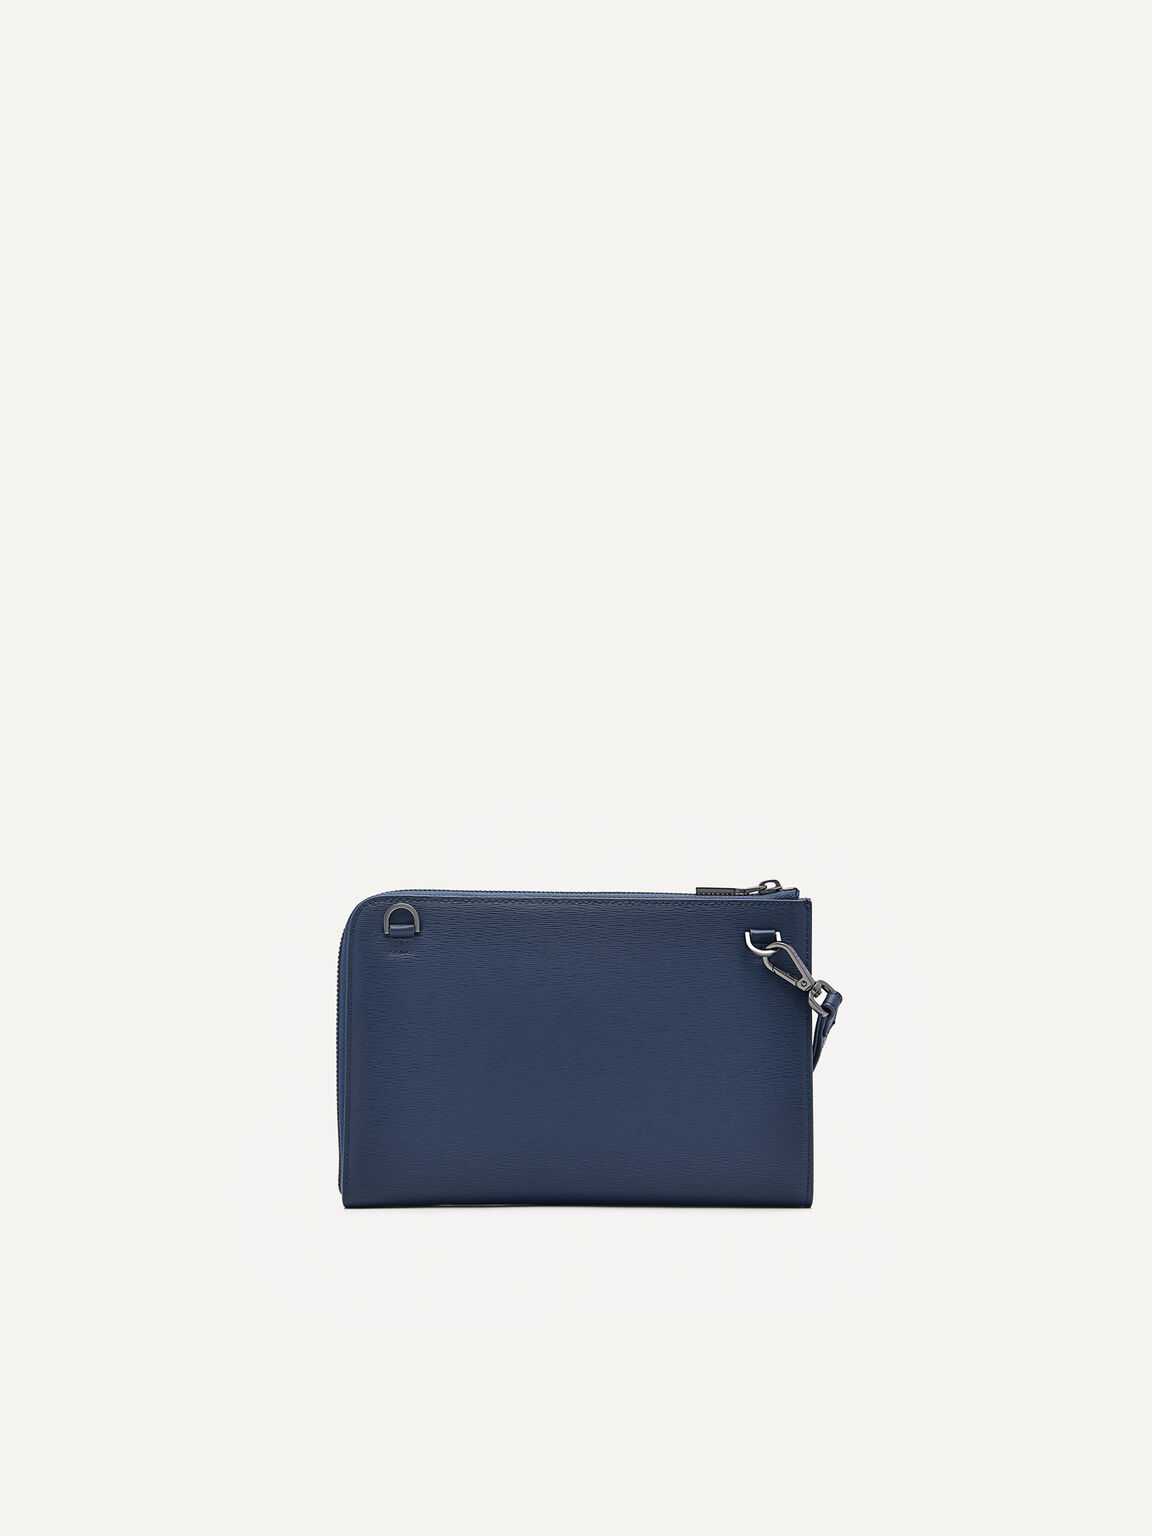 Small Leather Clutch Bag, Navy